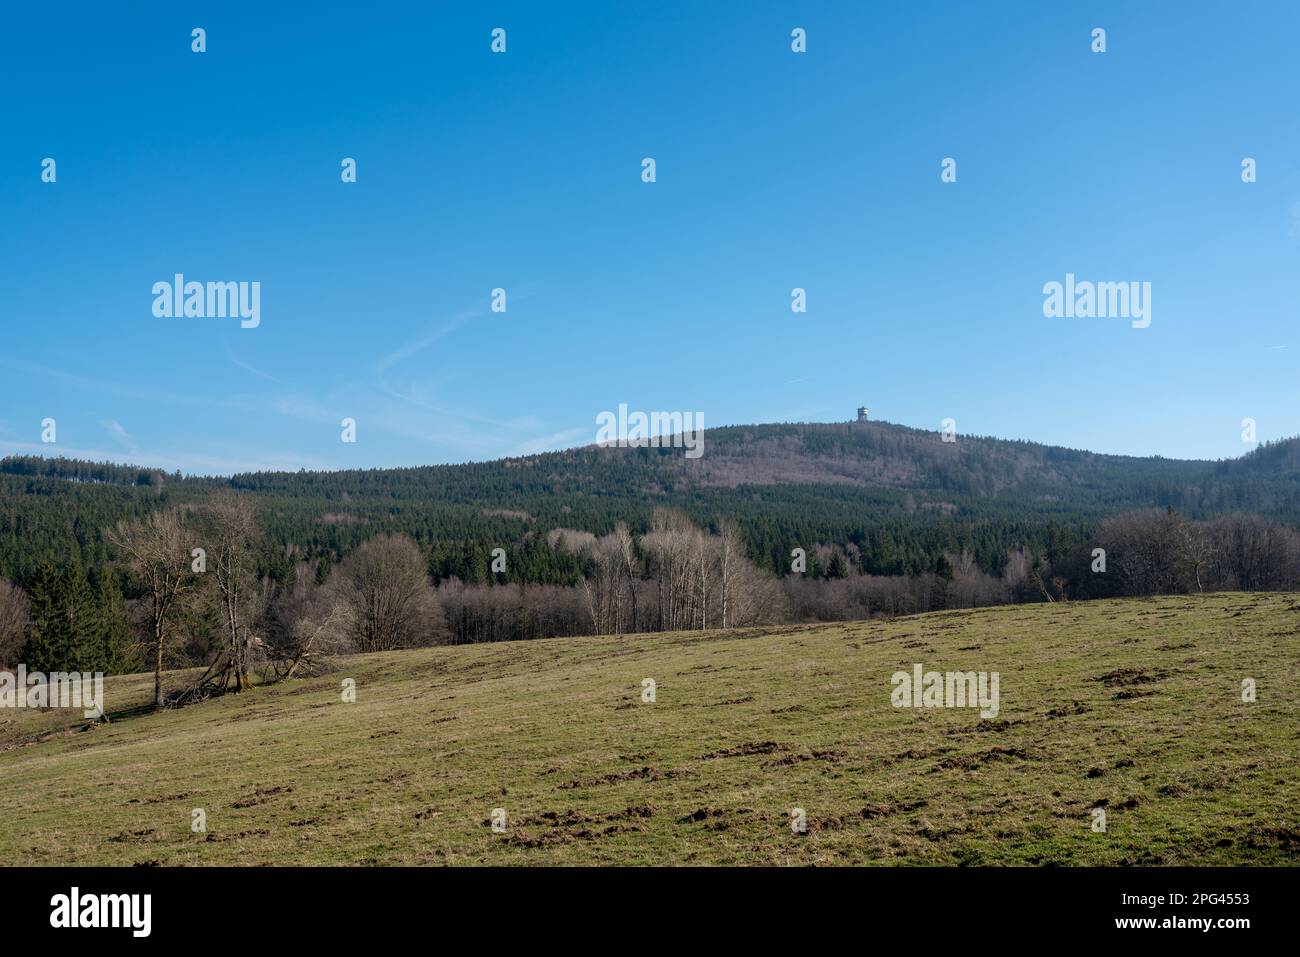 Velký Zvon (Plattenberg) hill with a military installation as seen from the area of former village Walddorf, Upper Palatine Forest, Czech republic. Stock Photo